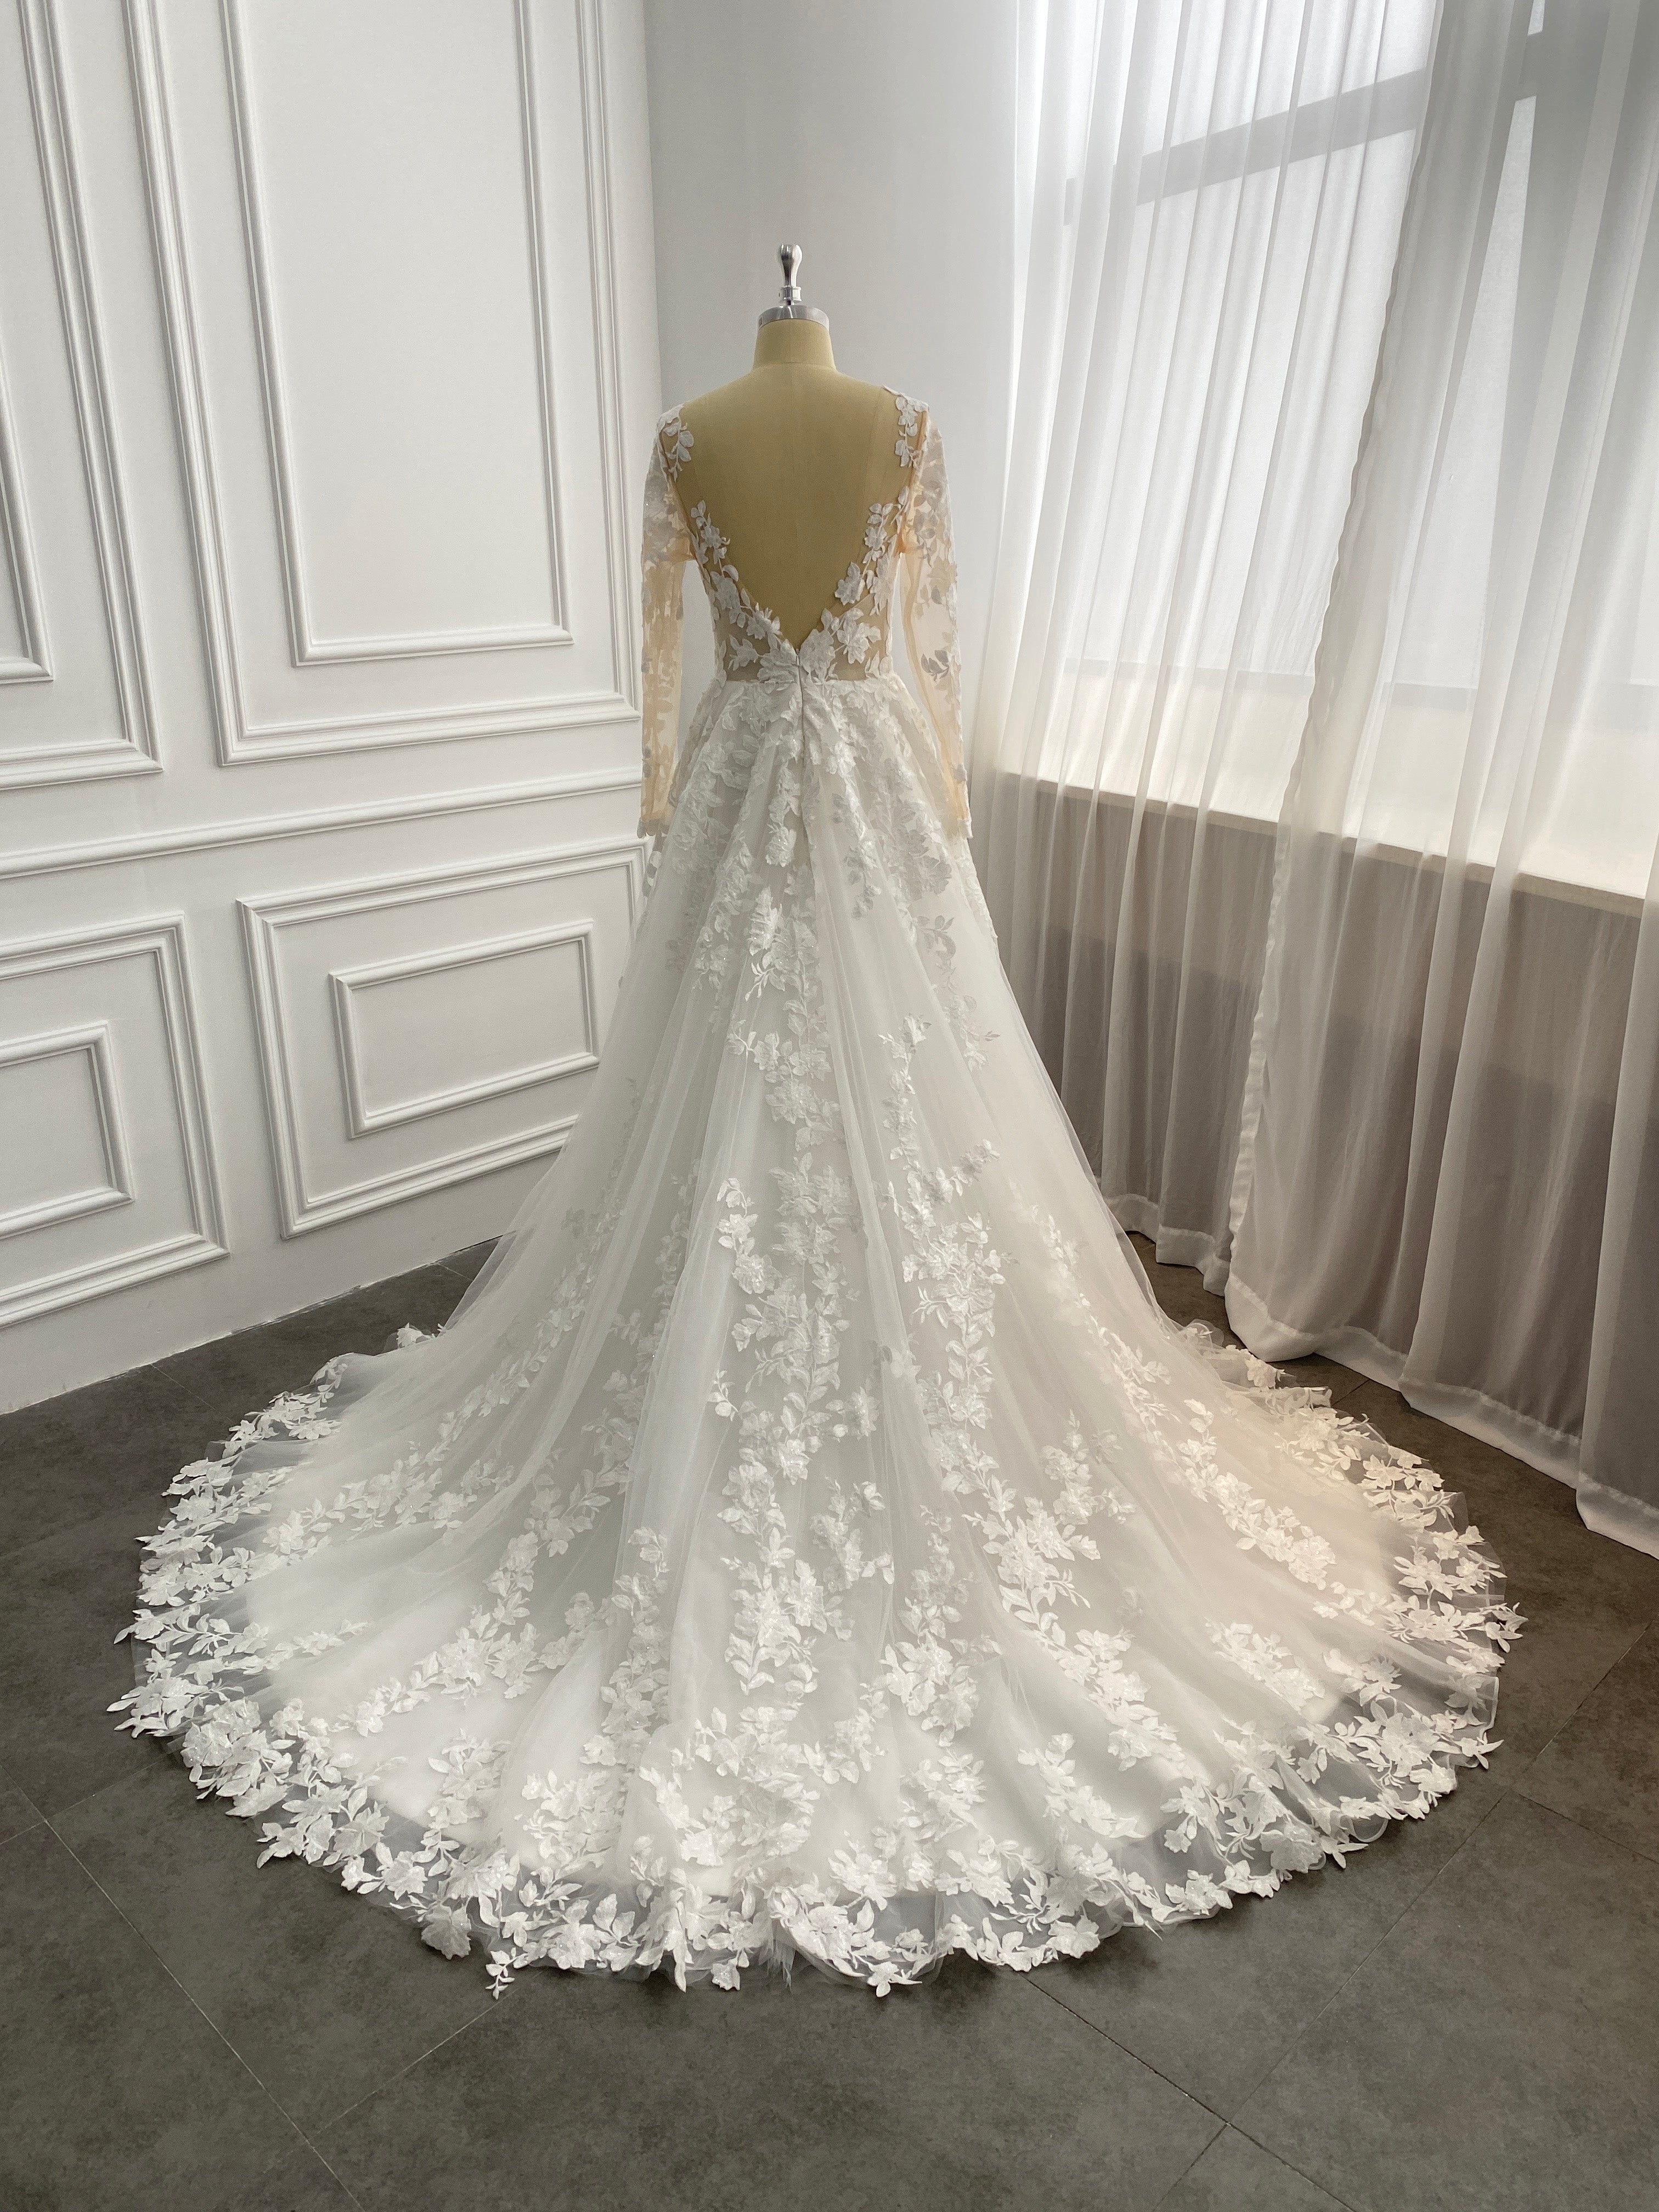 Plunge Neckline Long Sleeves Lace Tulle Wedding Dresses, Handmade Long Wedding Dresses, 2021 Wedding Dresses, Bridal Gown